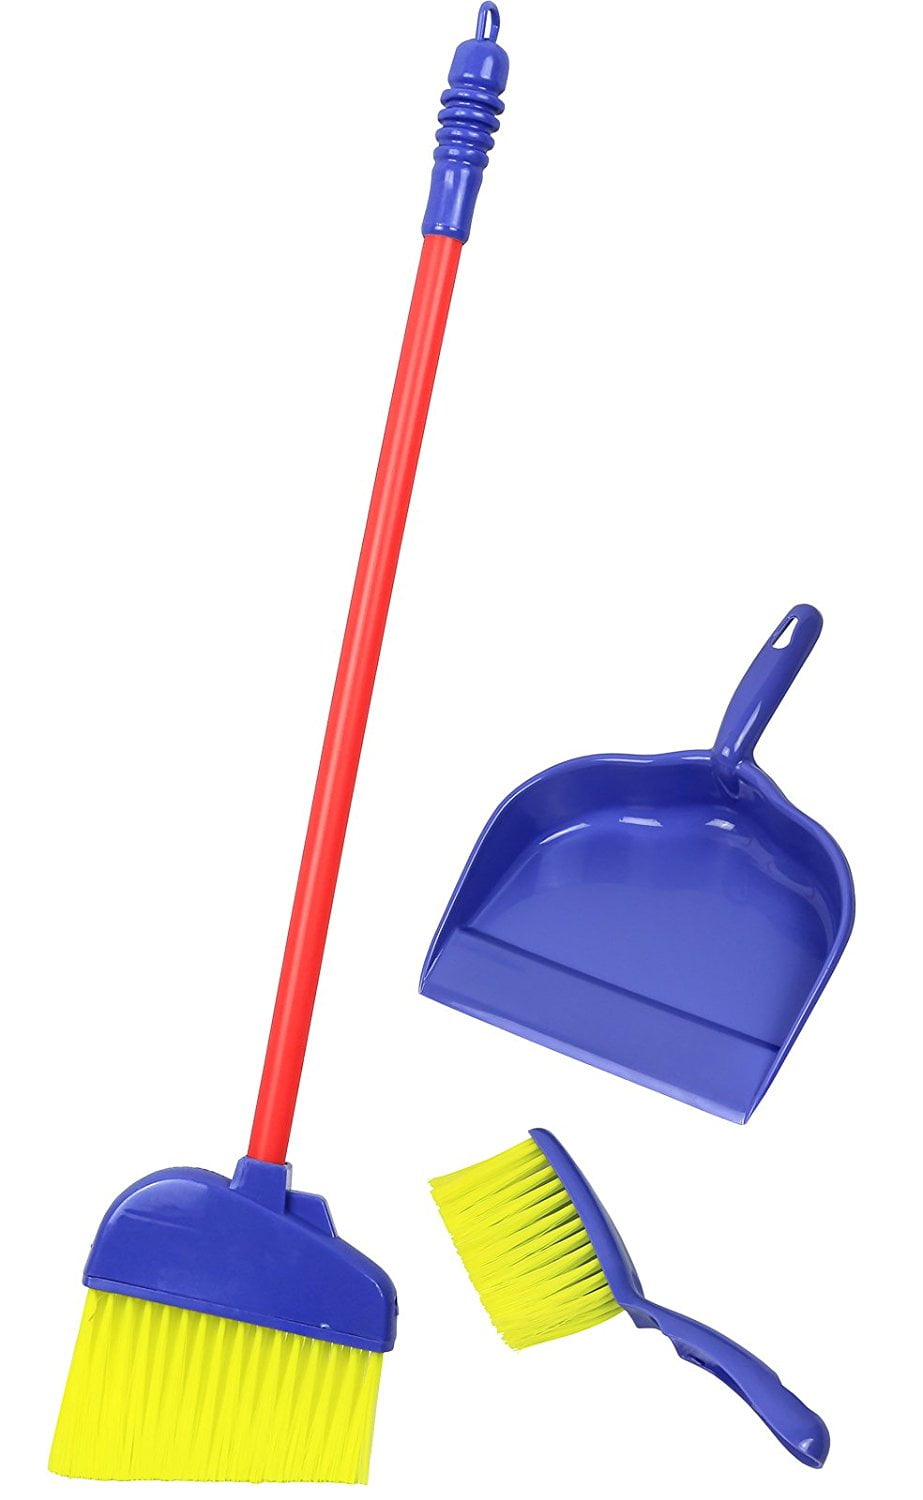 Kids Role Play Cleaning Cleaner Toy Bucket Dust Pan Brush Set For Kids 